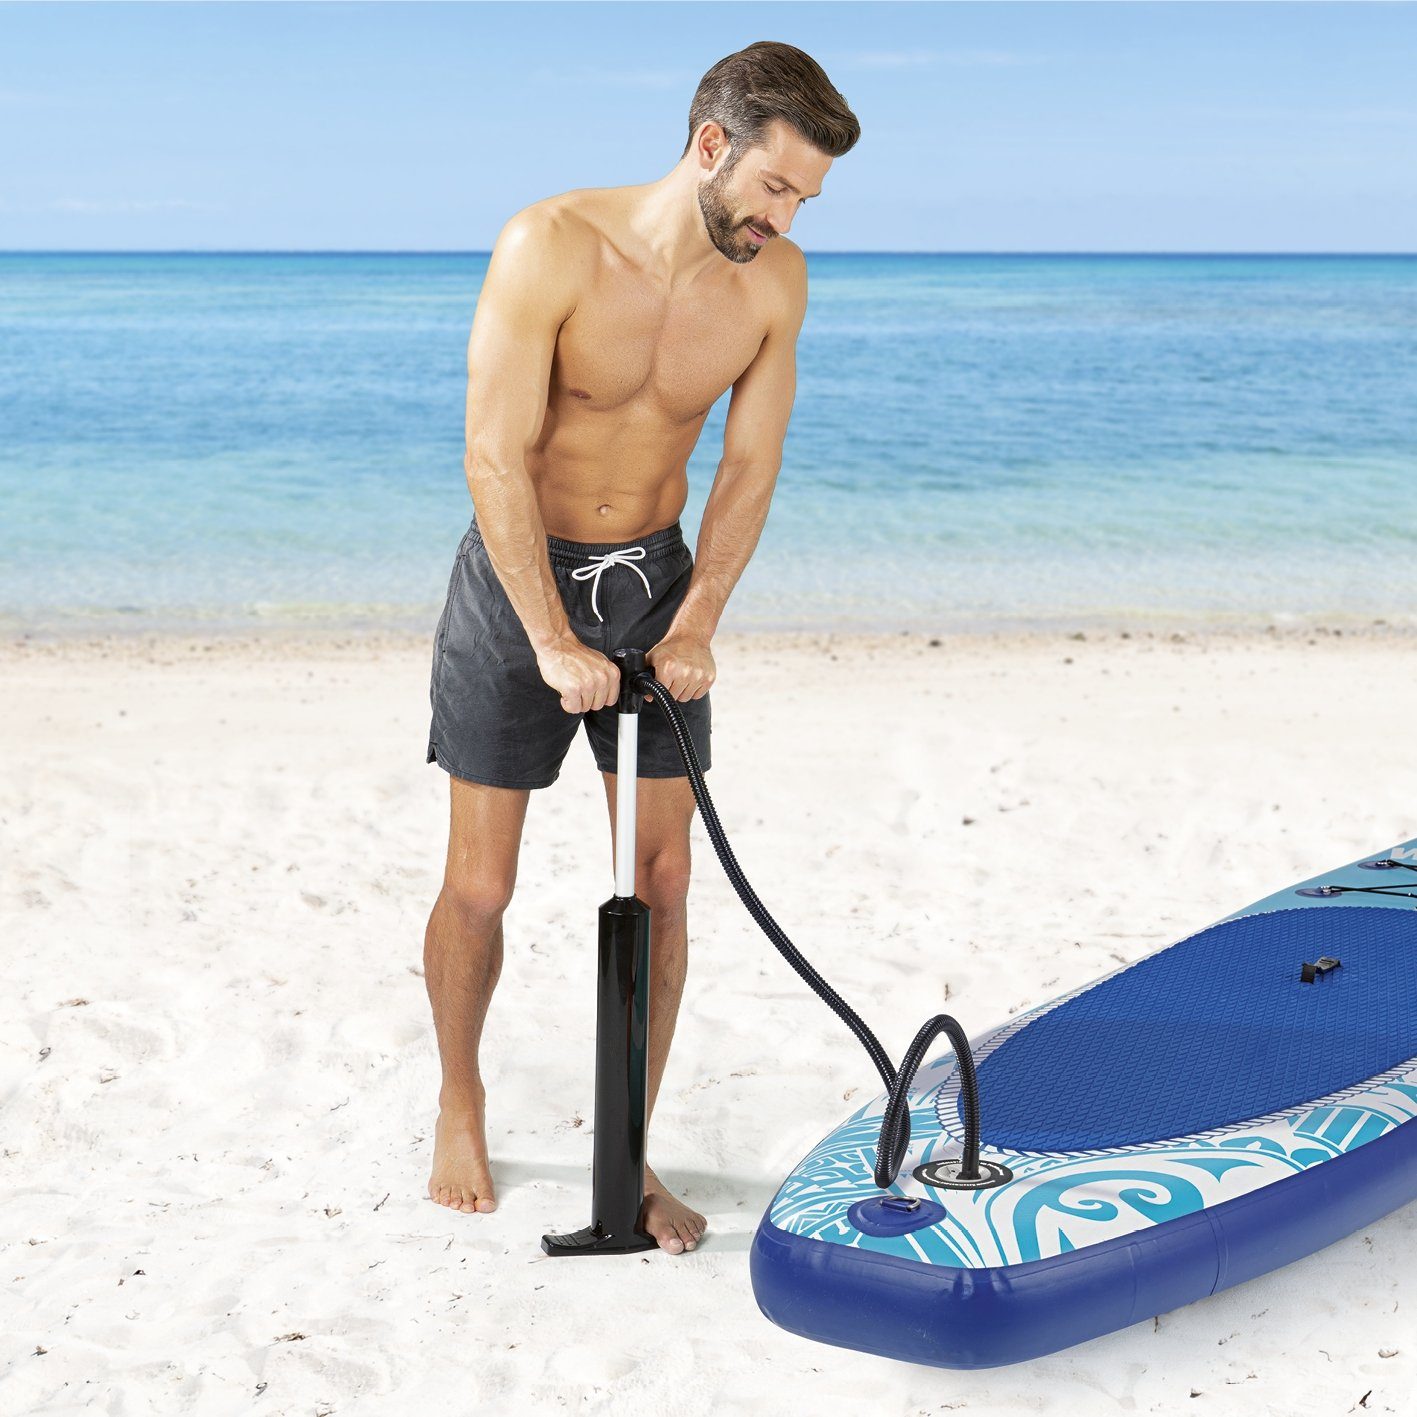 MAXXMEE Inflatable SUP-Board, 300 cm, Paddle-Board Board SUP Set 110kg, Paddle inkl. Stand-Up up Stand Paddel blau/türkis Paddling Komplett Board